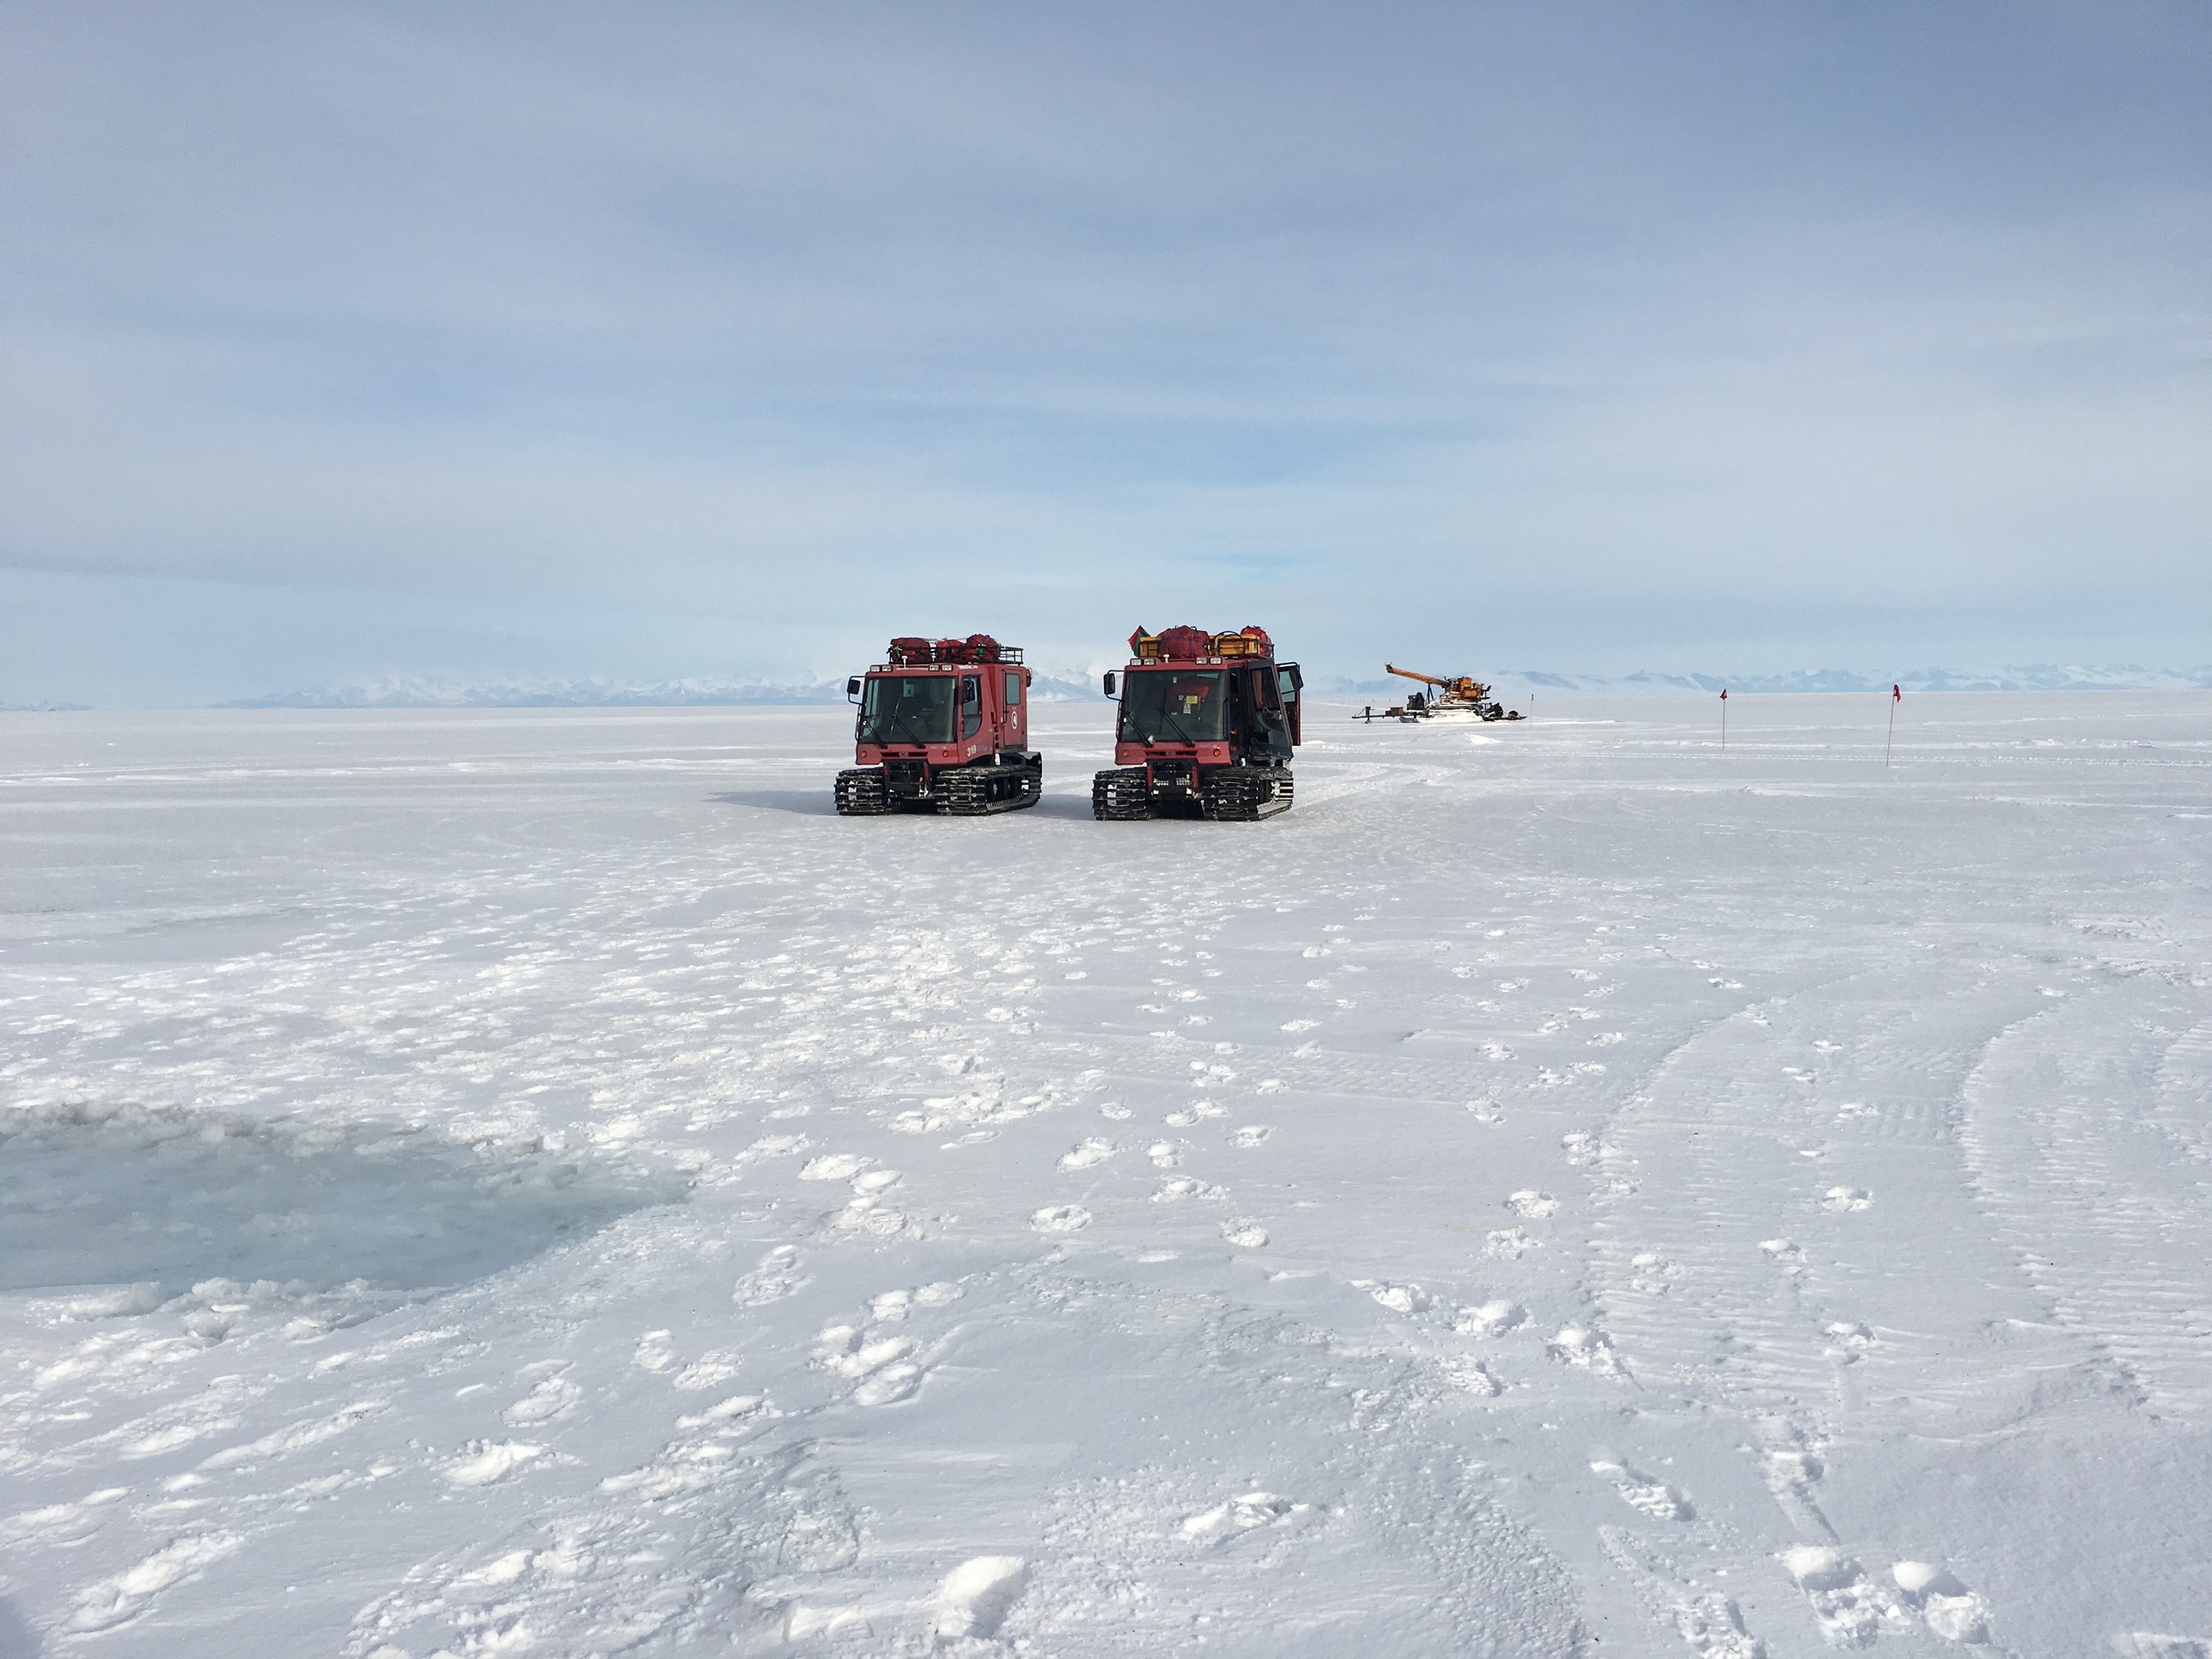  Two pisten bully on the ice with the drill rig in the background. 